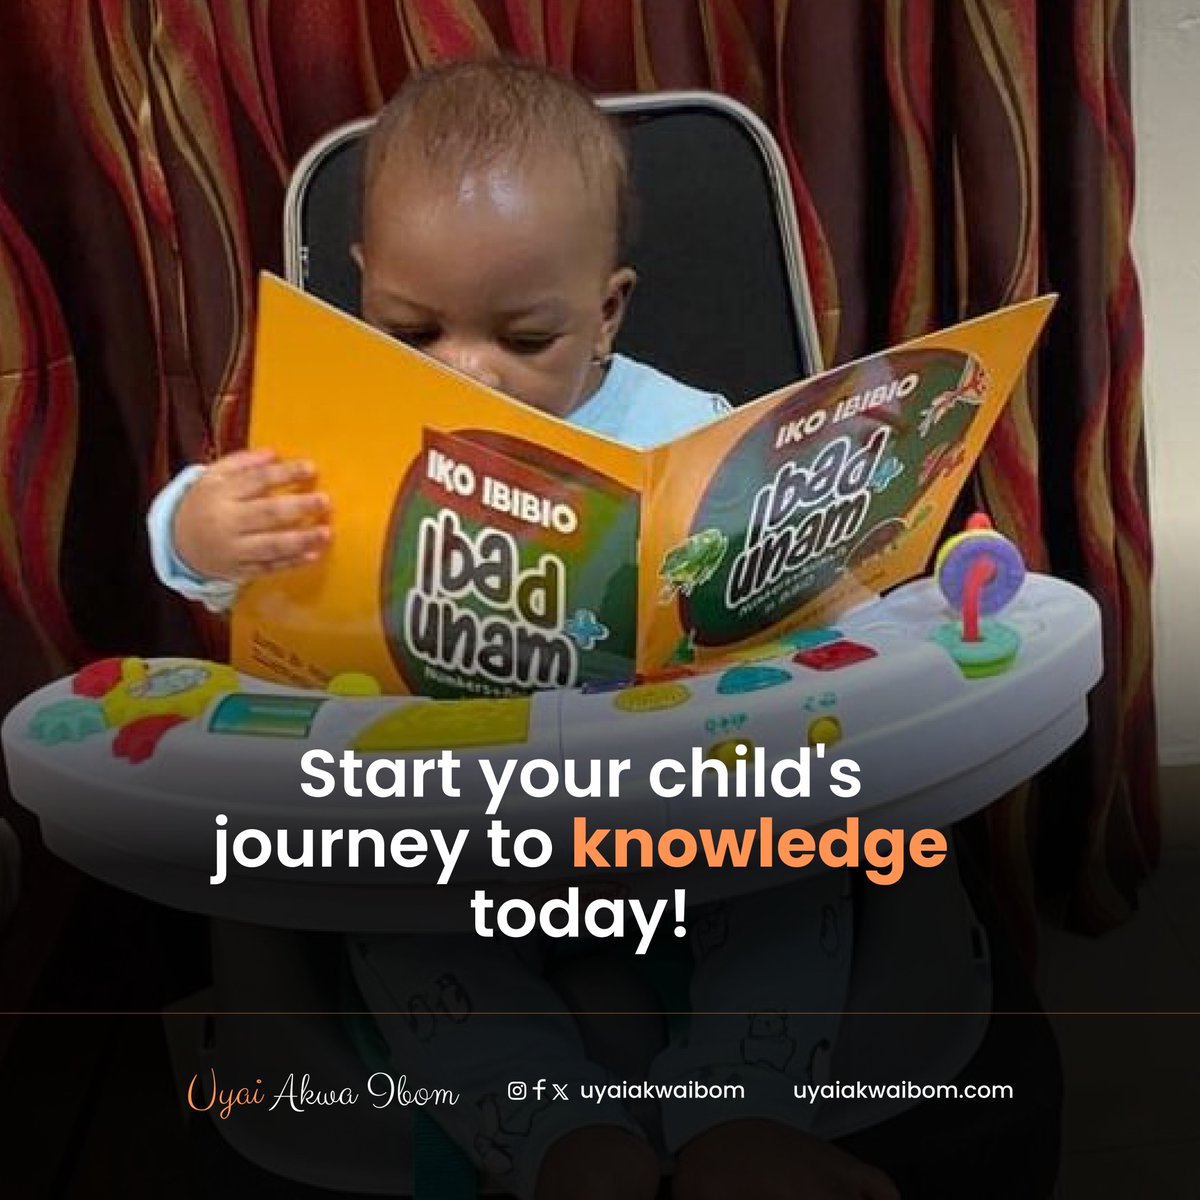 👶📖 From ABCs to 123s, watch as tiny hands explore the vast world within the pages of a textbook. Plant the seeds of knowledge early and watch them bloom into a future full of endless possibilities💡✨
.
#LearningIsMagical #EarlyEducation #IgniteCuriosity #ExploreMore  #baby